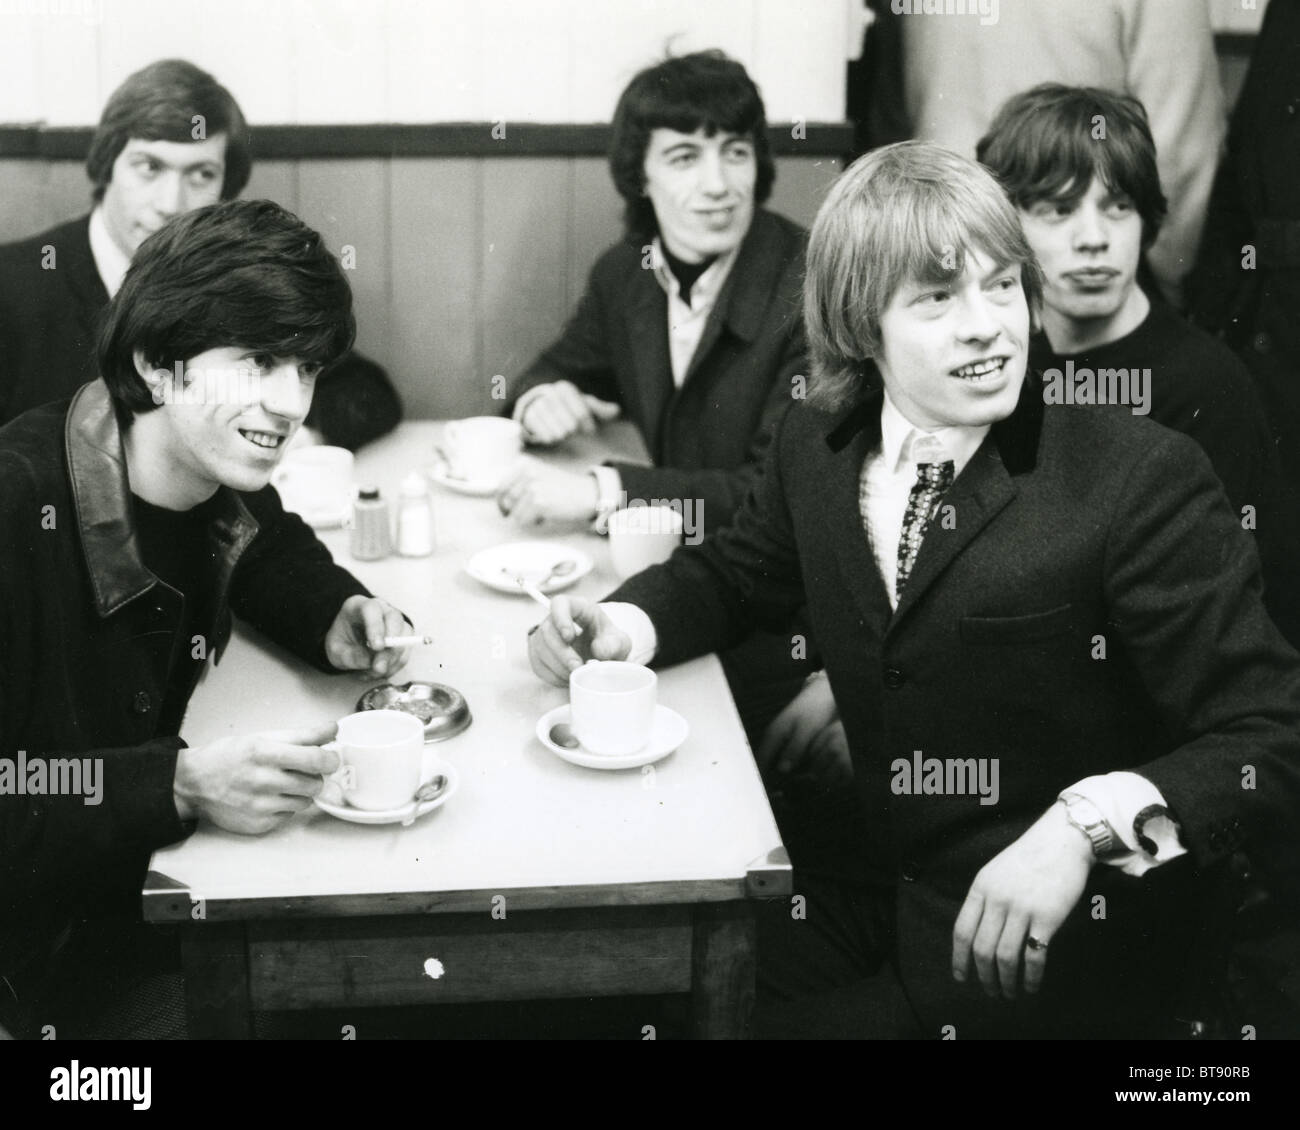 ROLLING STONES in a London cafe in June 1964. From l: Charlie, Keith, Bill, brioan and Mick. Photo Tony Gale Stock Photo